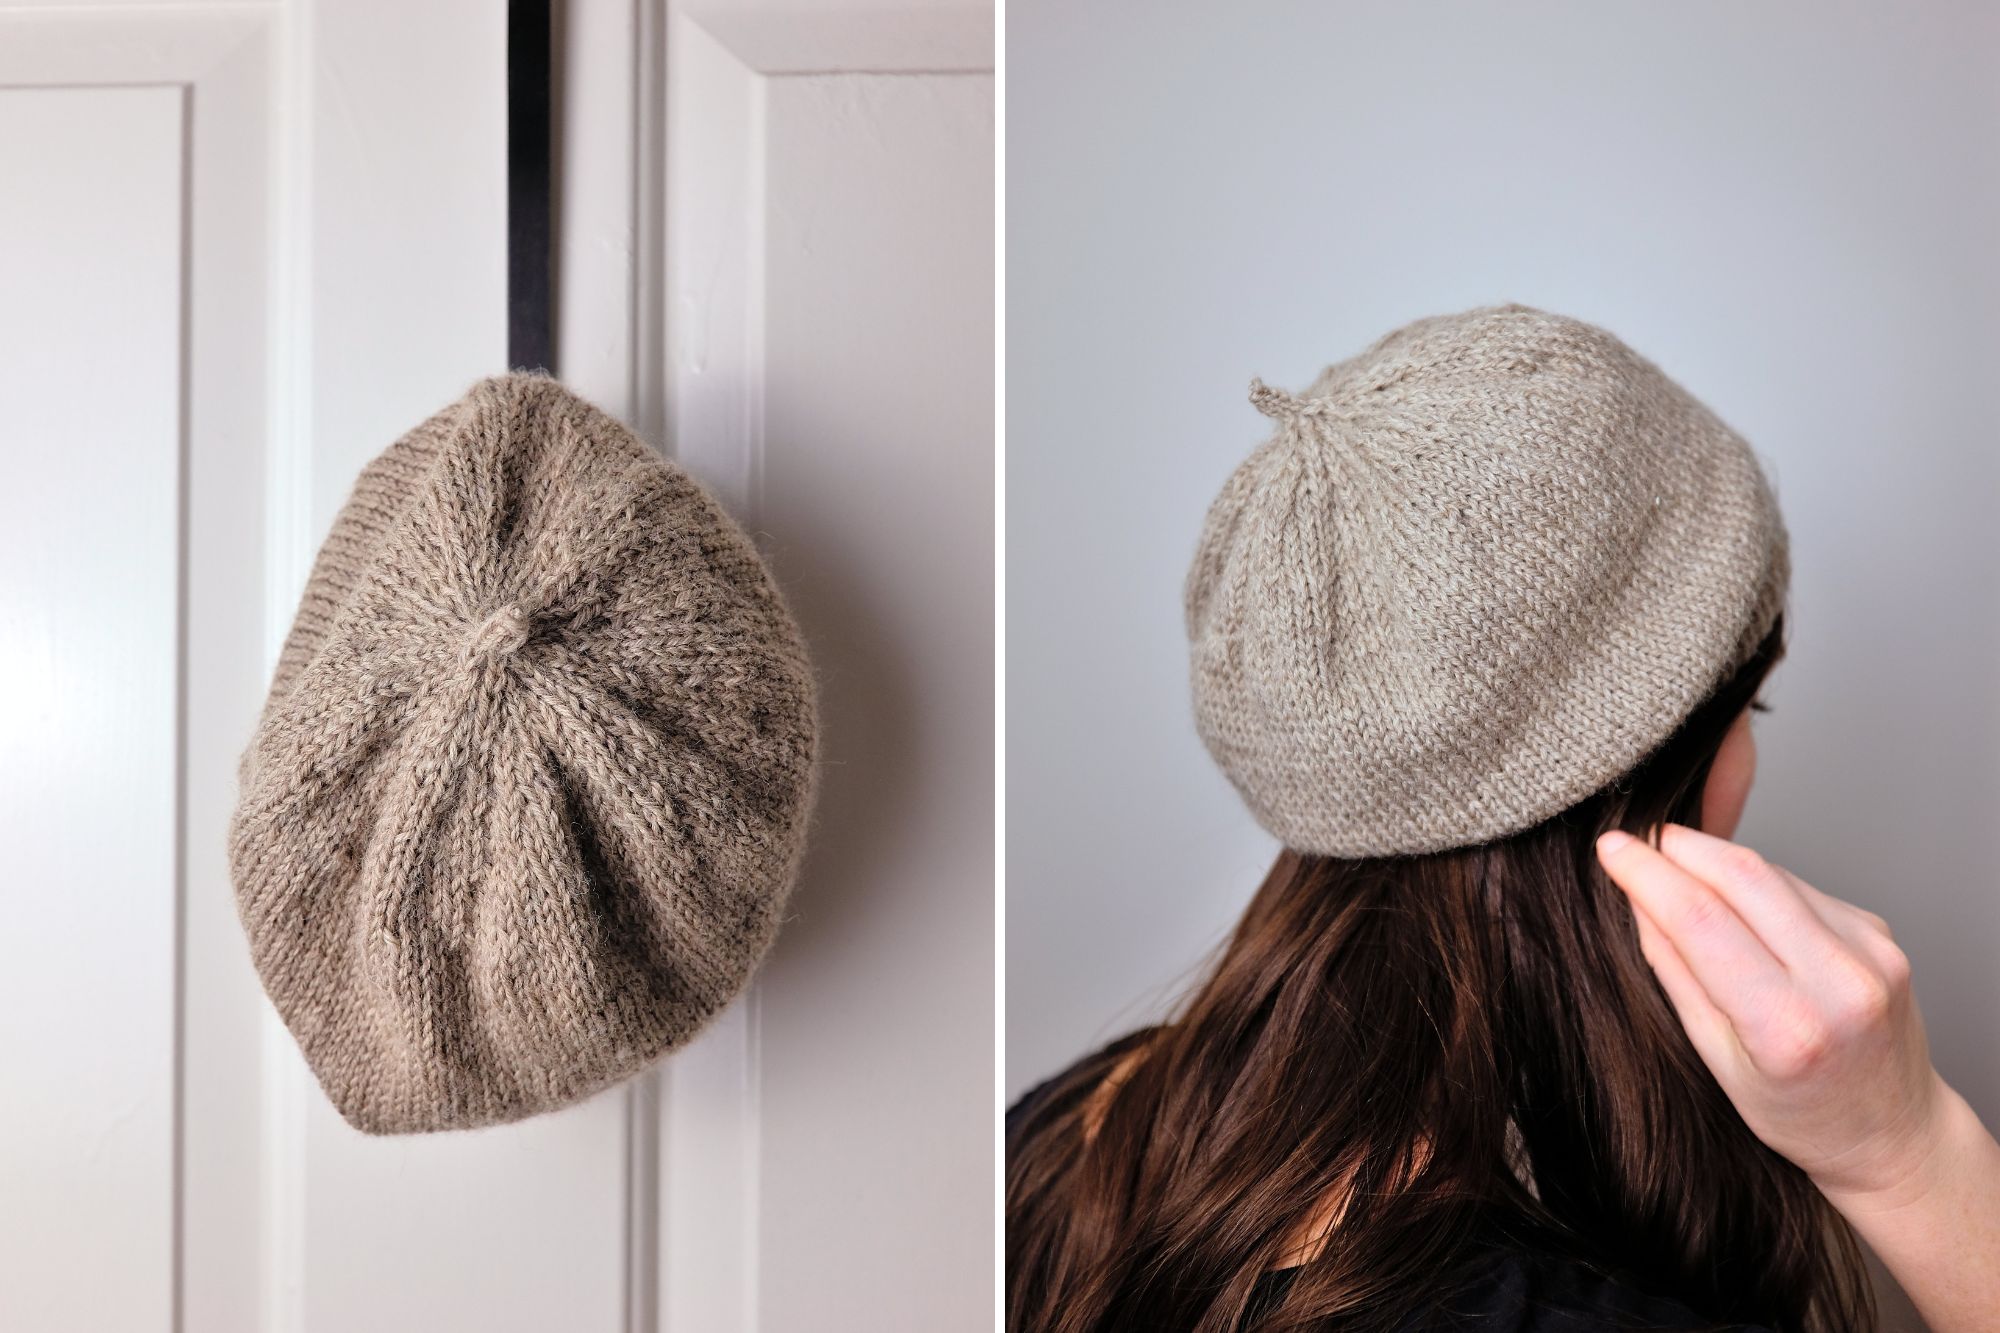 Two images: a beret hanging on a door hook, and Alyssa wearing the knit beret